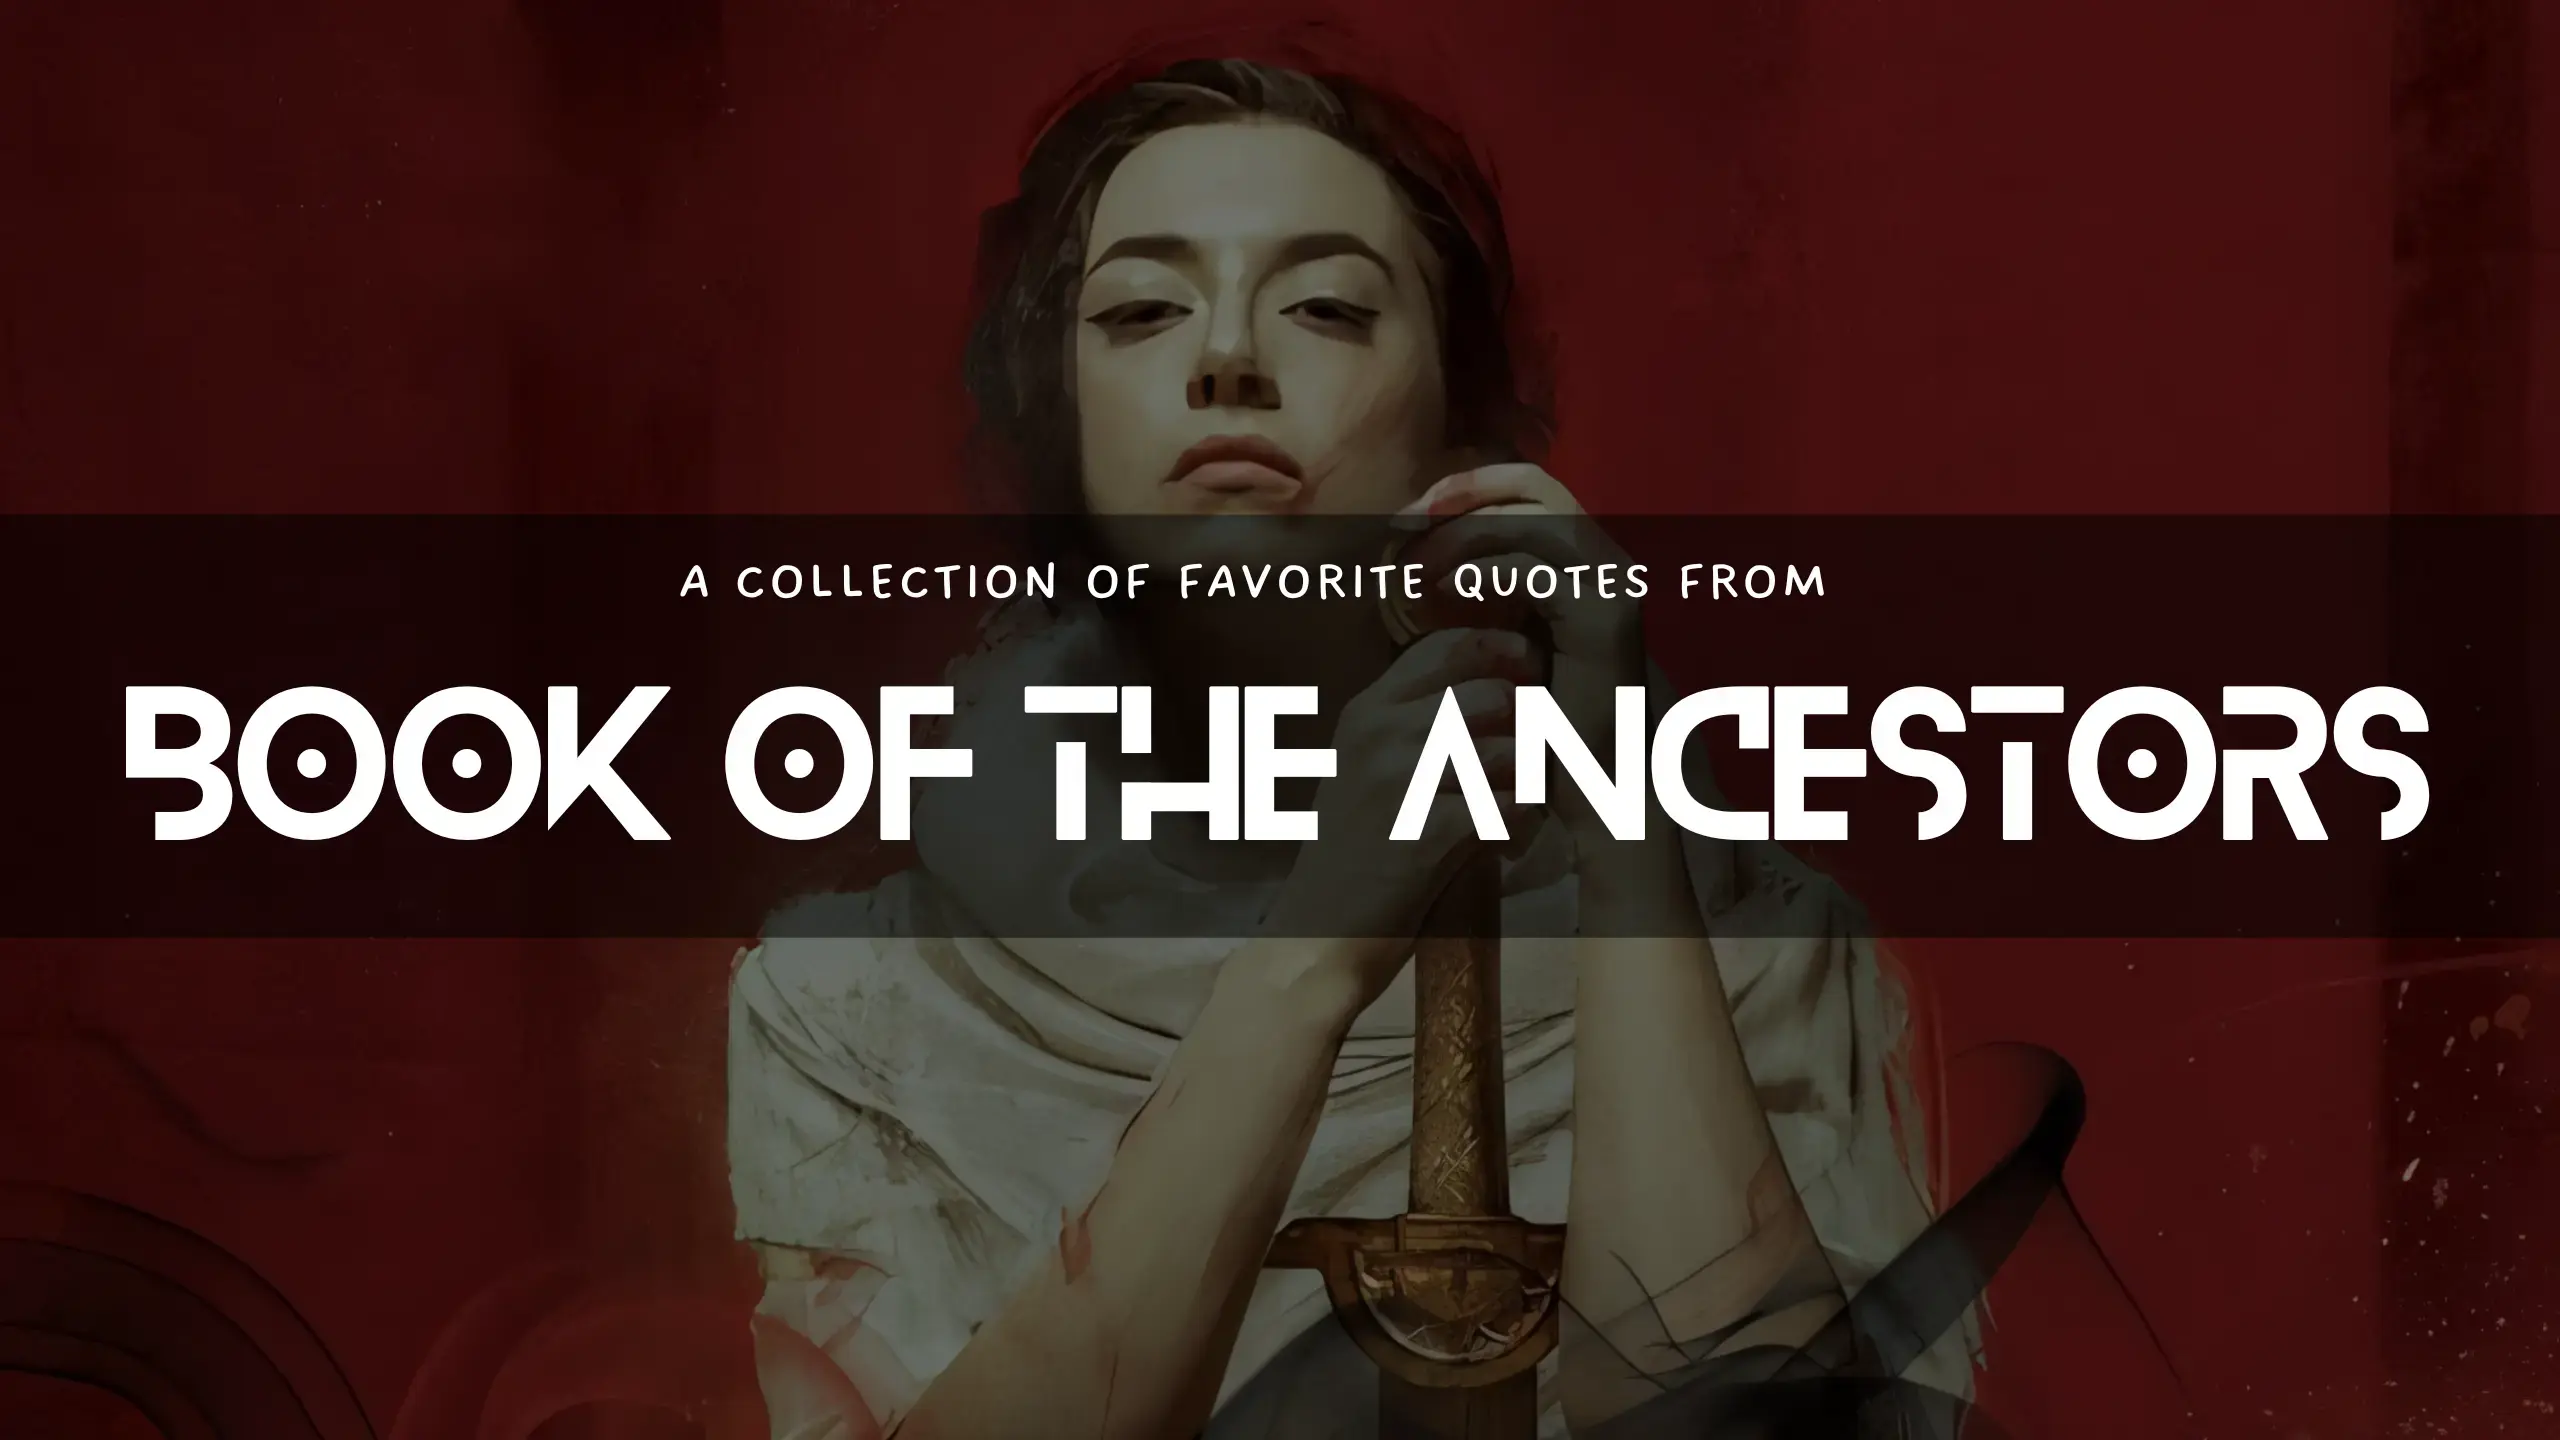 Book of the Ancestors Trilogy by Mark Lawrence